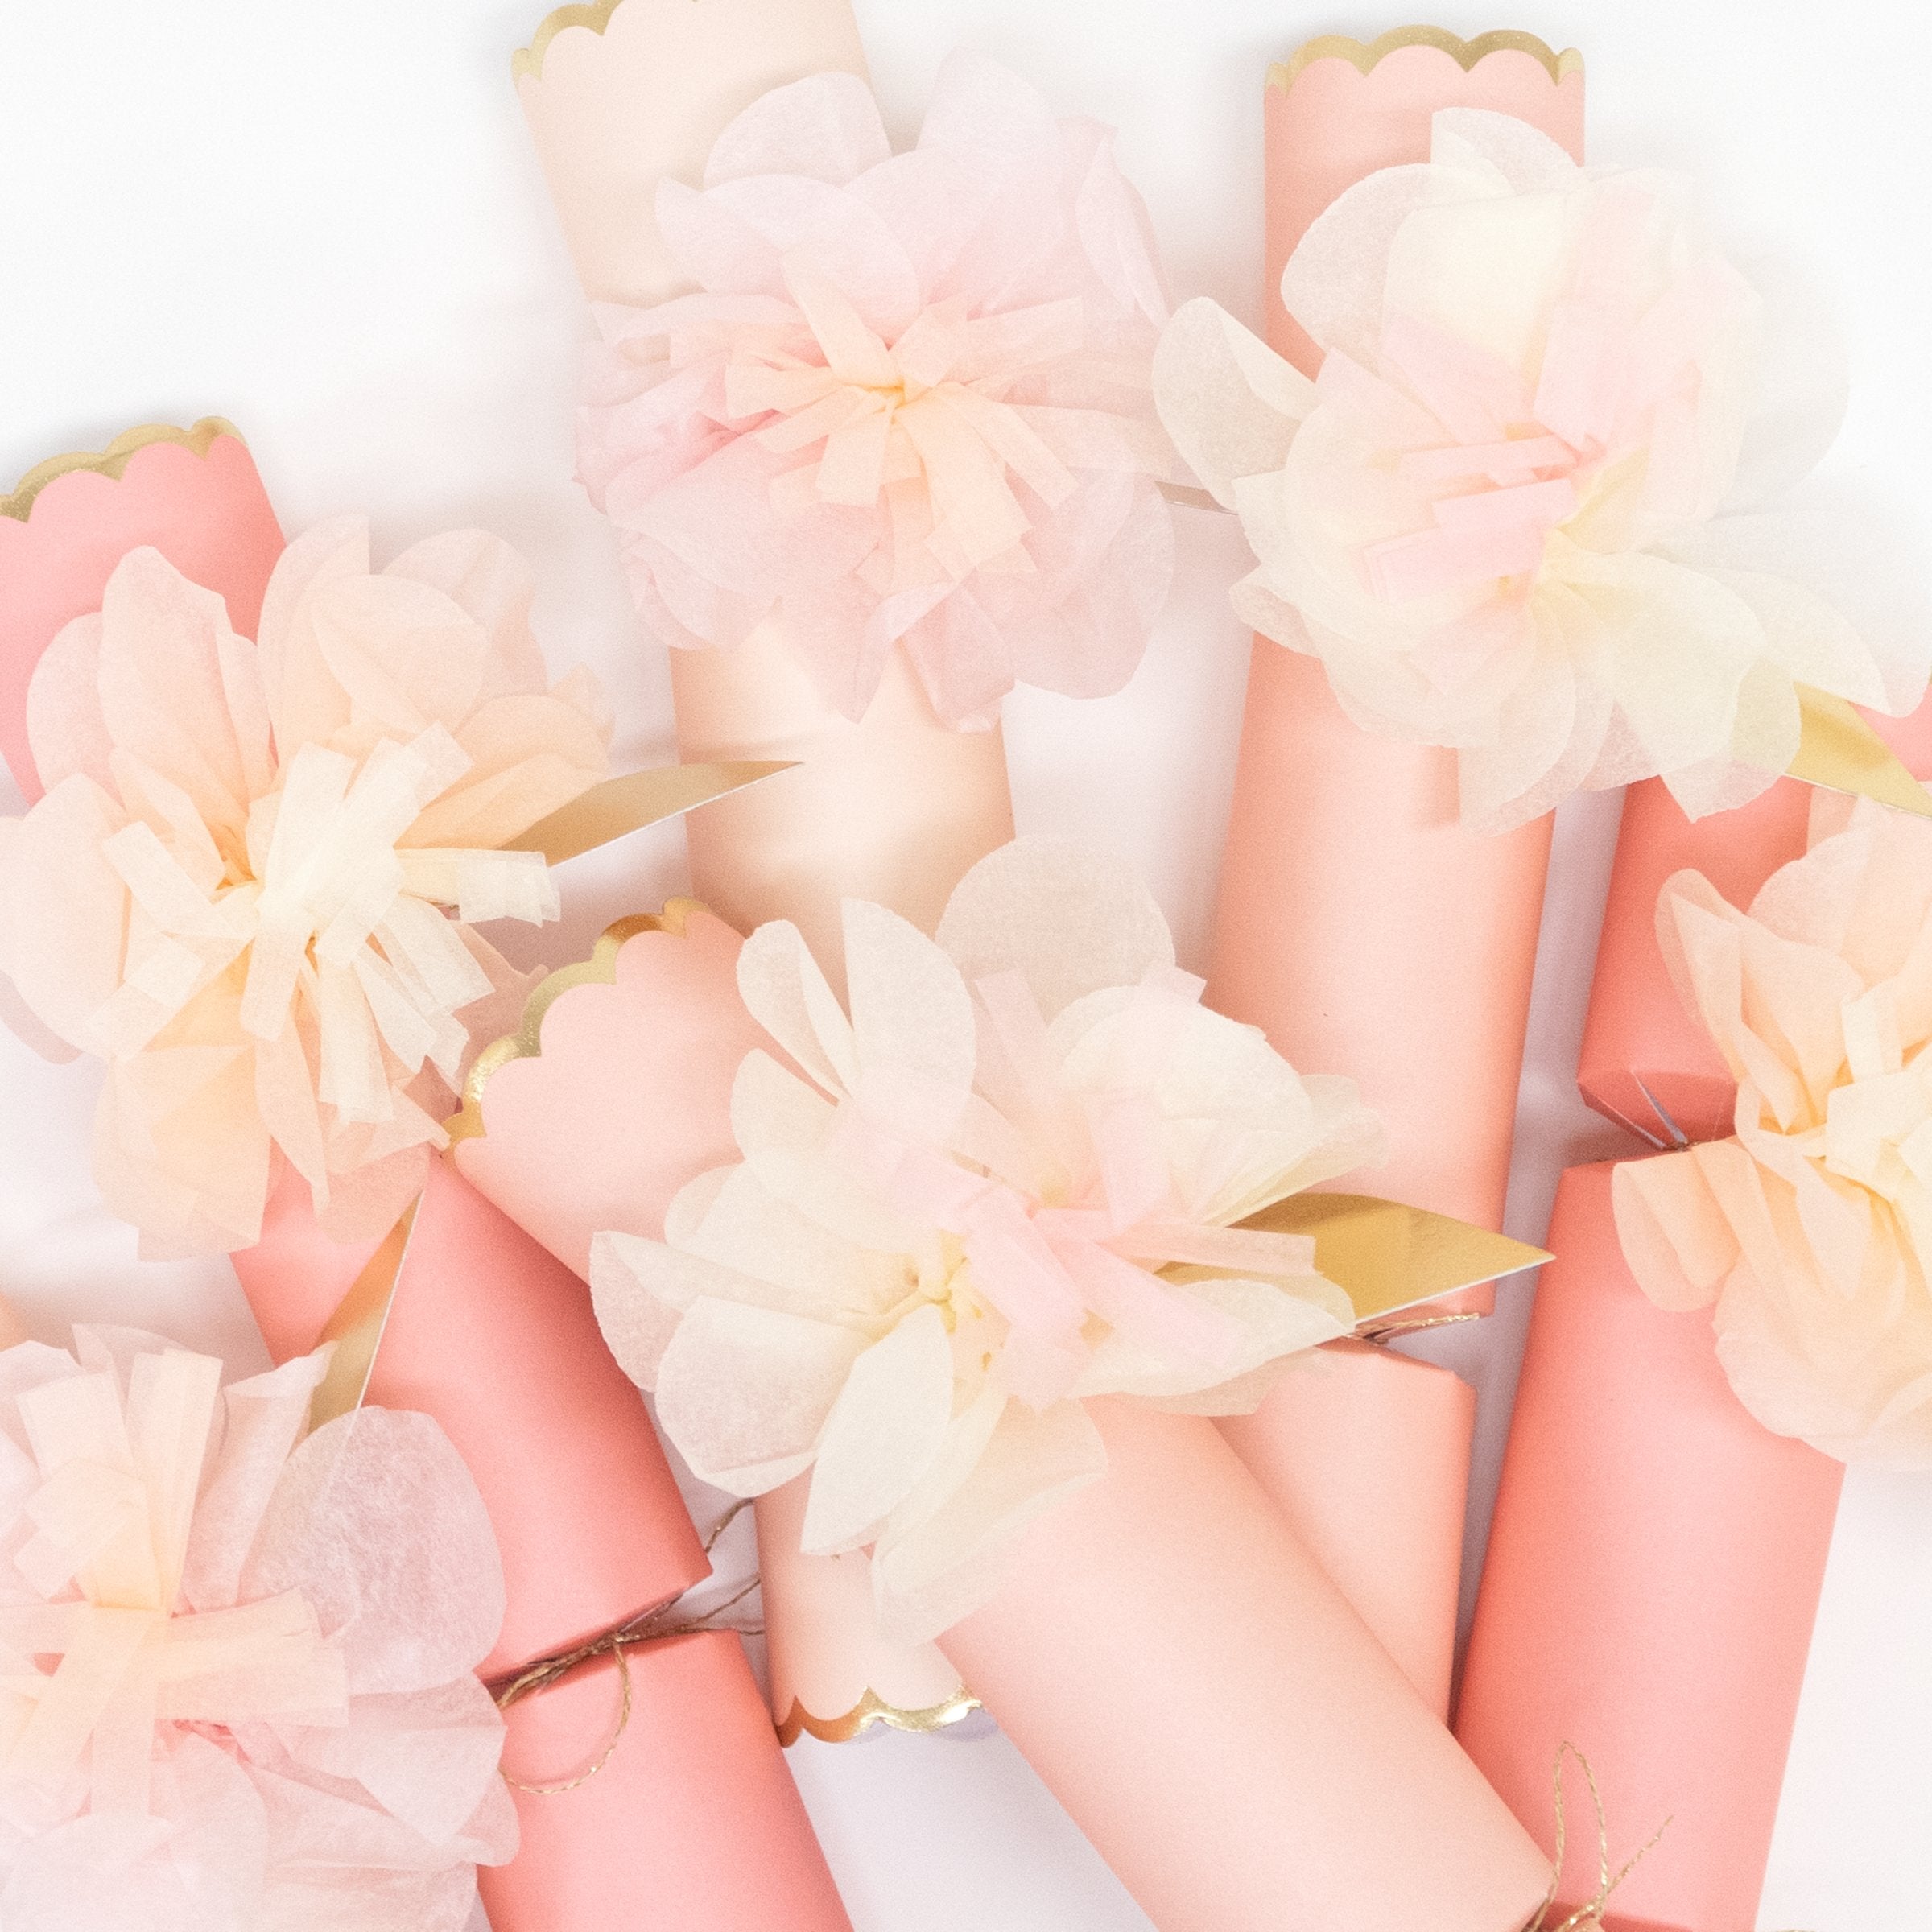 These pretty pink crackers are decorated with tissue paper flowers, and contain a tiara and sparkling glitter brooch.